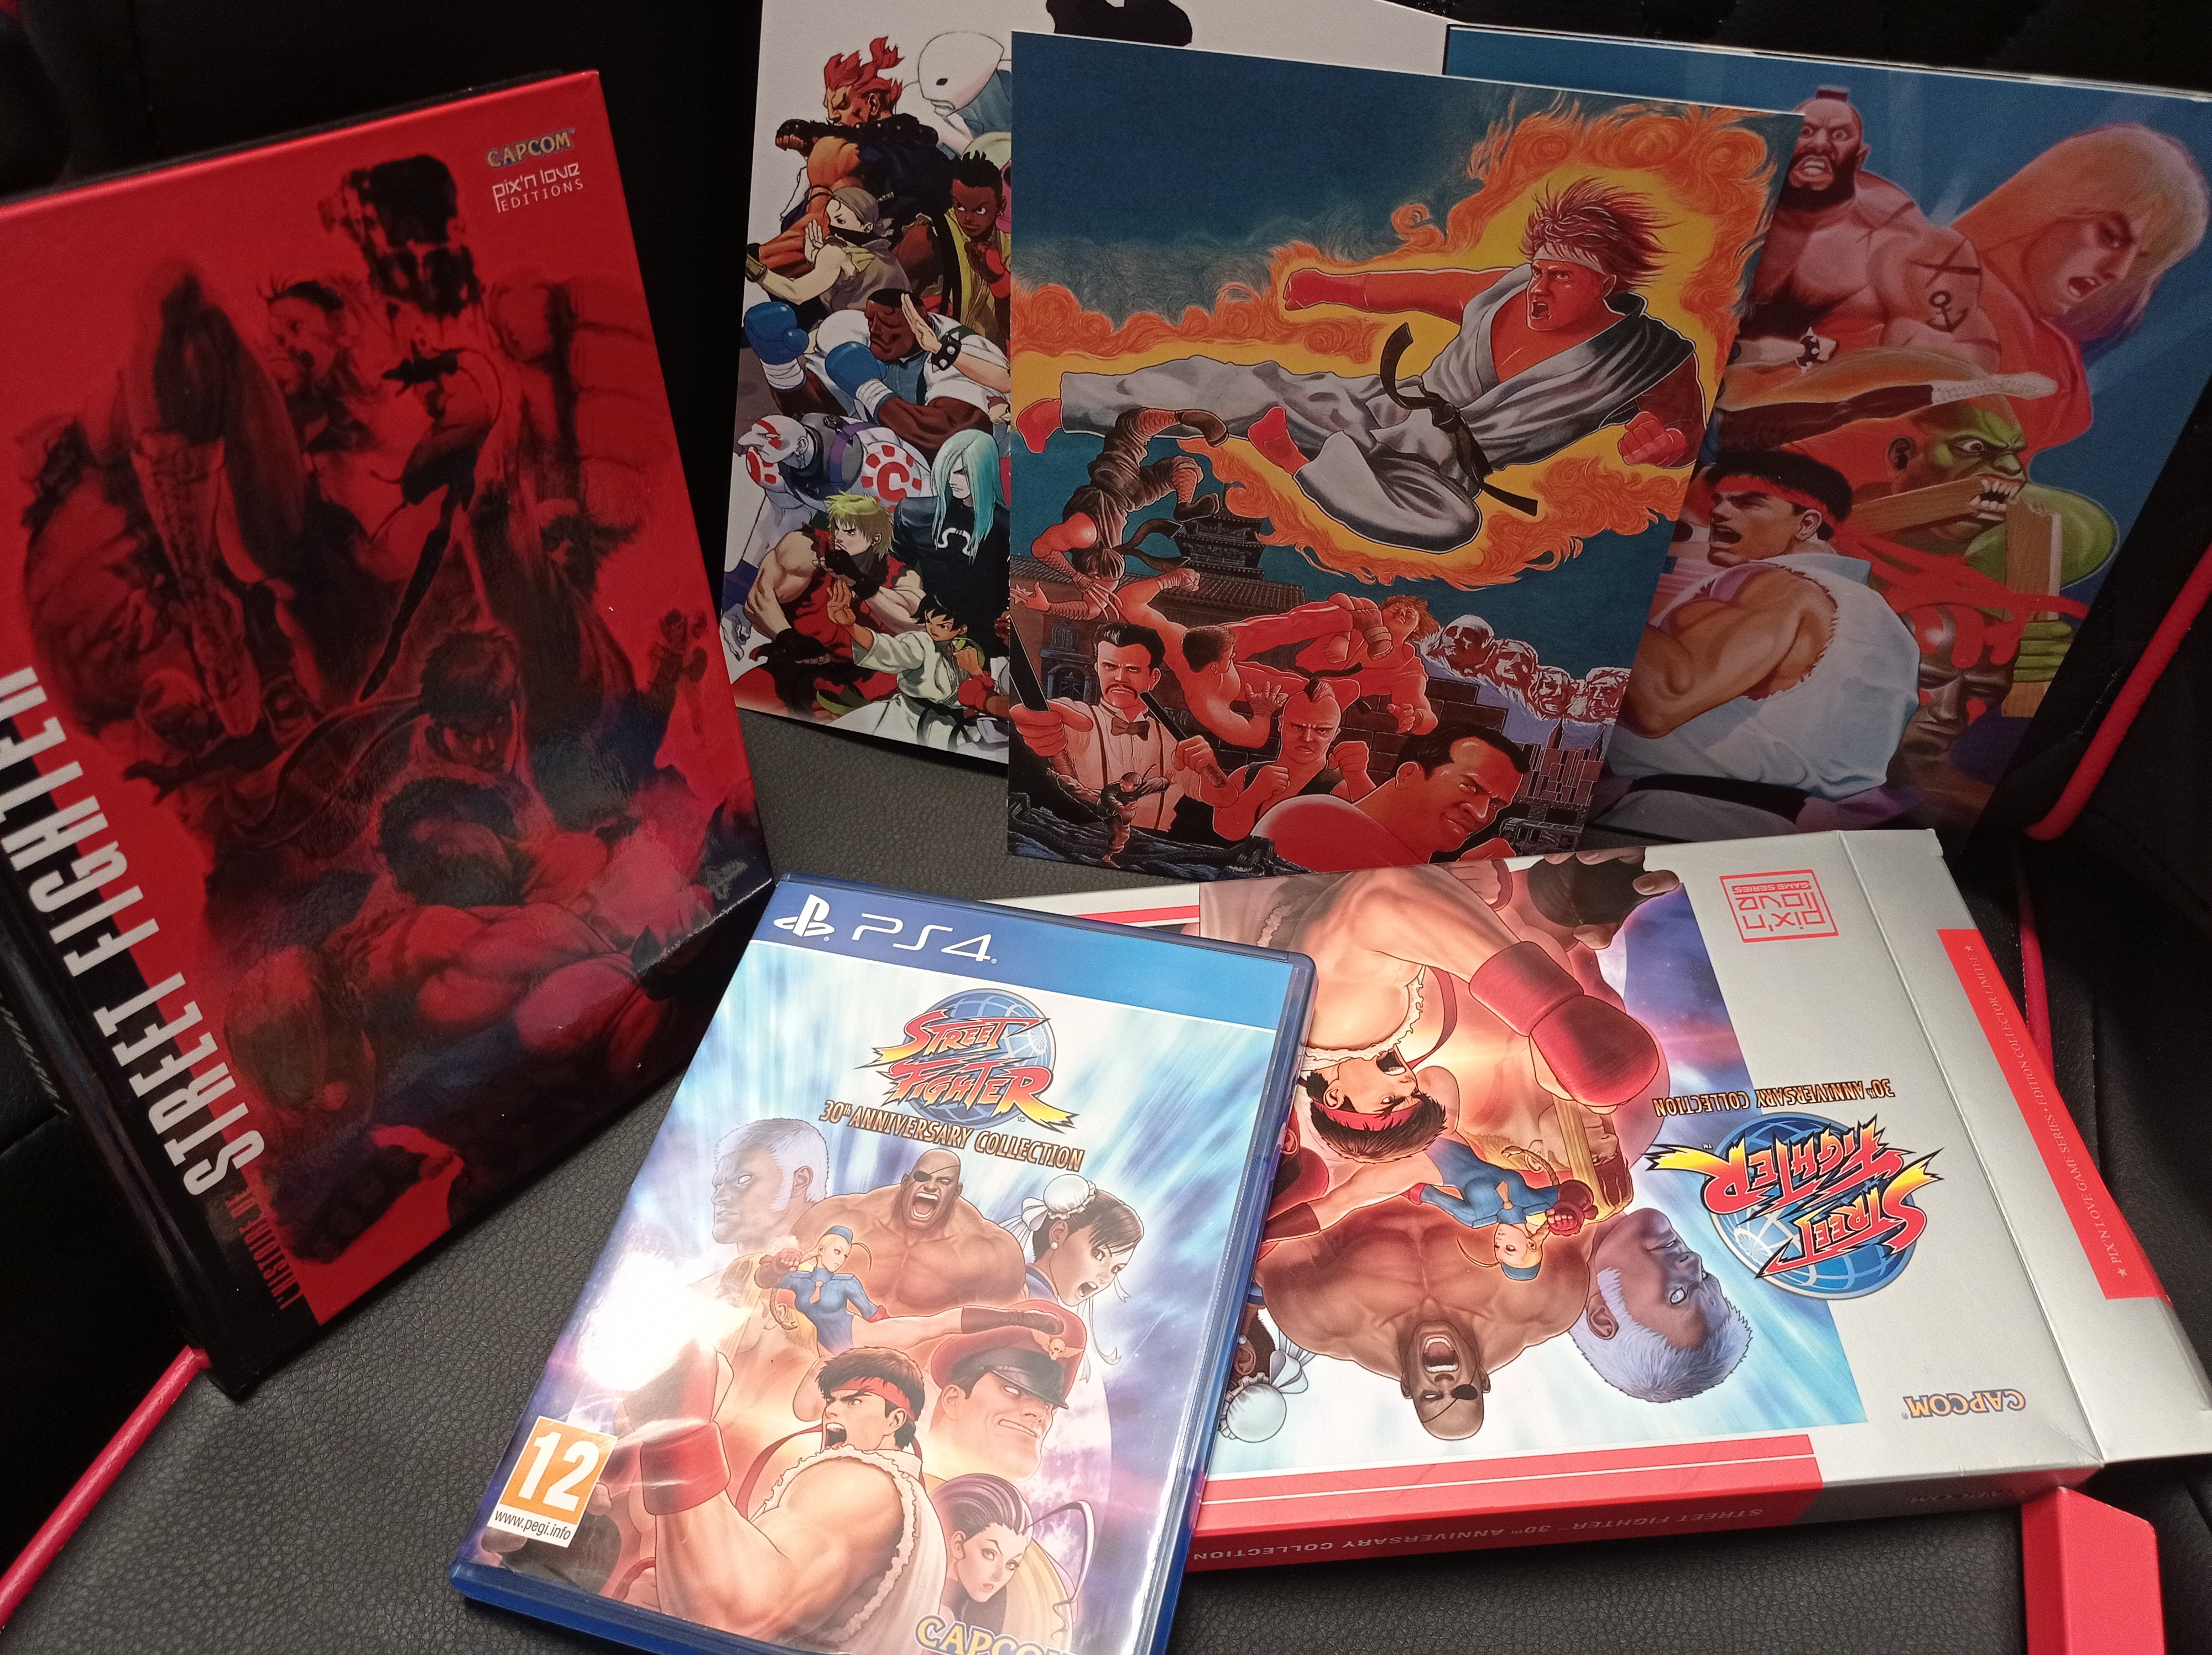 [VDS] Pix N love Street Fighter 30th anniversary édition sur PS4 0ybn